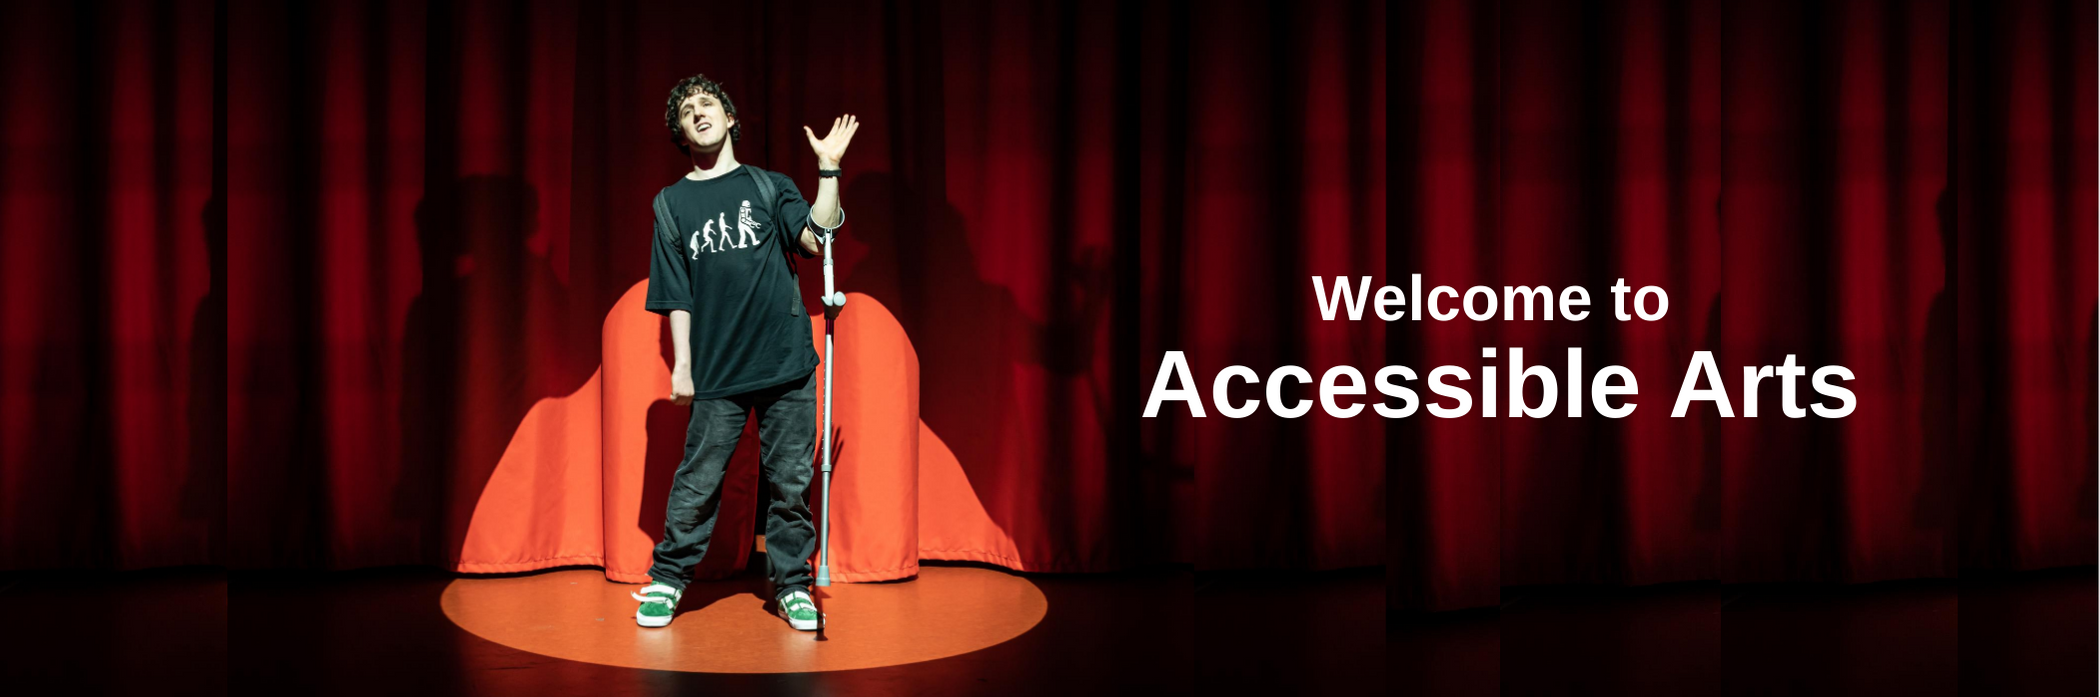 A young man is standing on a stage in front of a red curtain. He is illuminated by a spotlight. His right arm is raised and a walking brace is hanging from his arm. On his right are the words WELCOME TO ACCESSIBLE ARTS.